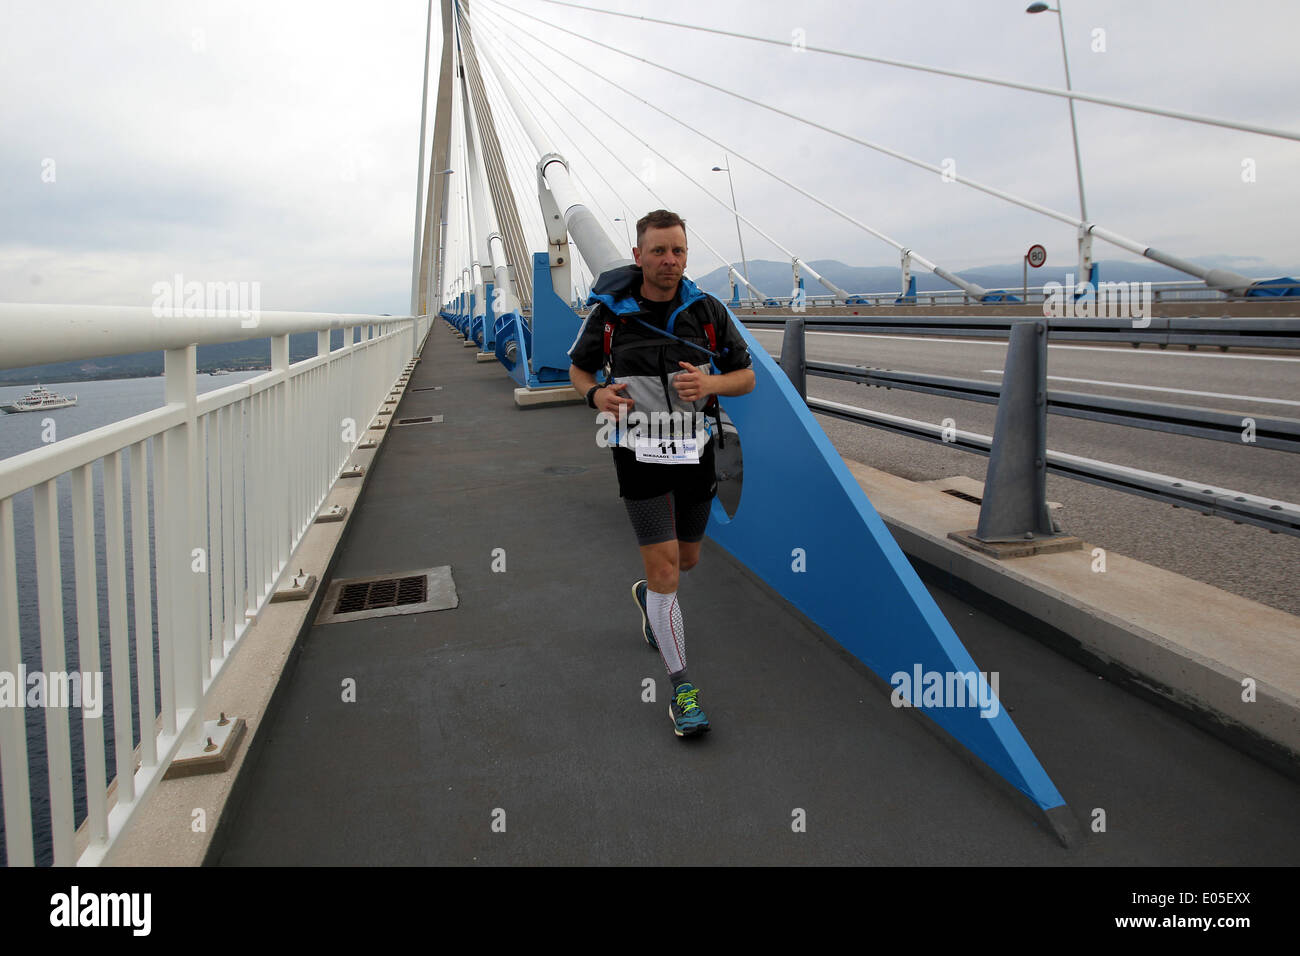 Athens. 3rd May, 2014. A runner crosses the Rio-Antirrio Bridge which connects mainland Greece to the Peloponnese peninsula during the 3rd Dolichos Ultra Marathon on May 3, 2014. A total of 26 athletes, among them one Chinese, started on Friday running nonstop a 255 kilometers race with a 48 hours time limit to Olympia, the birthplace of the Olympic Games. © Marios Lolos/Xinhua/Alamy Live News Stock Photo